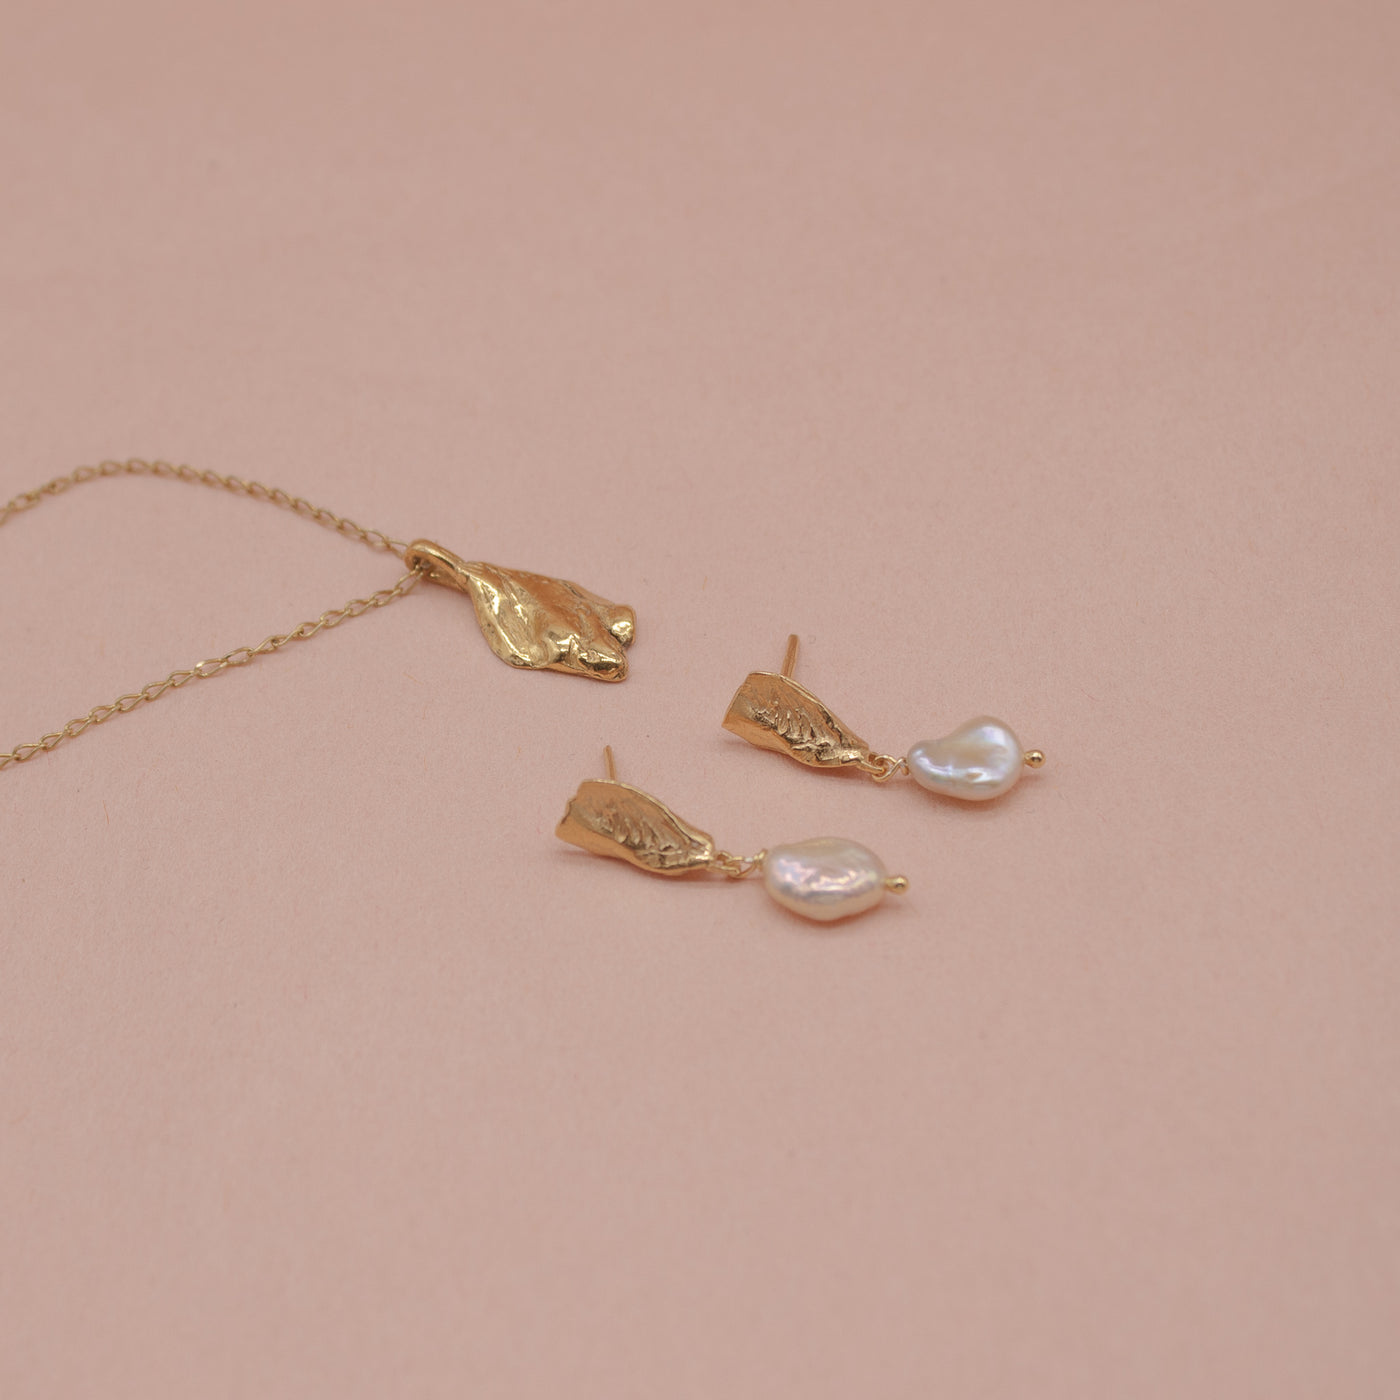 Jewelery set // LIADAL ear studs x ELVEN necklace gold plated